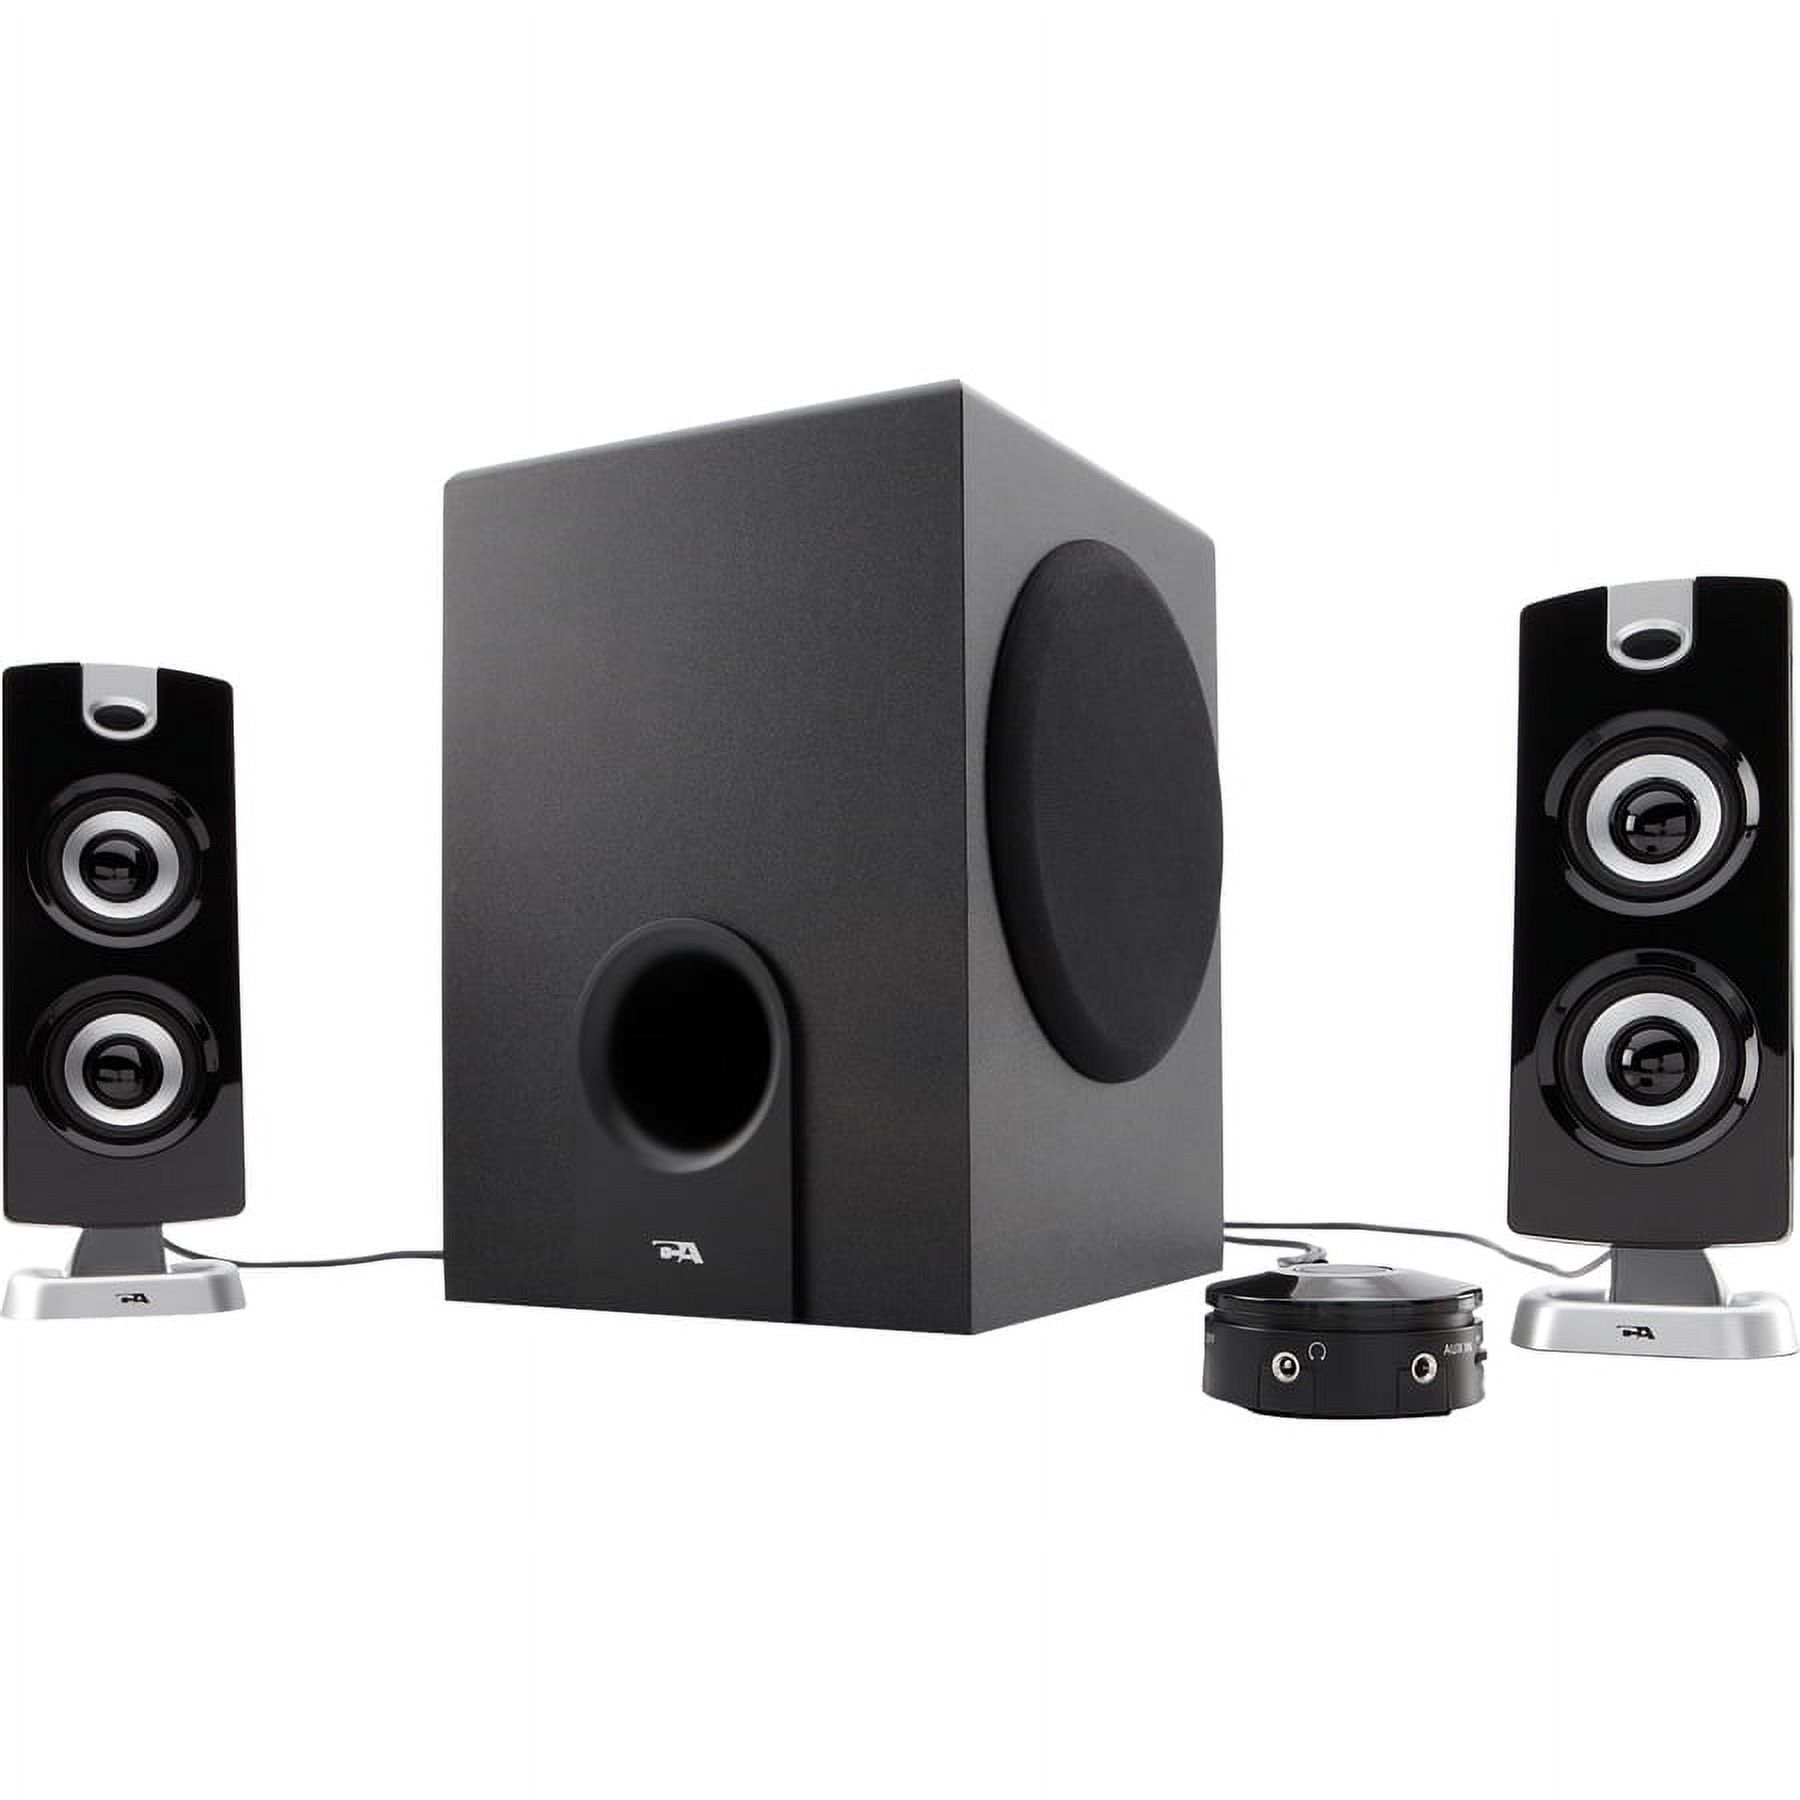 Cyber Acoustics CA-3602 Platinum Speaker System - 2.1-channel - 30W (RMS) / 62W (PMPO) - image 4 of 4